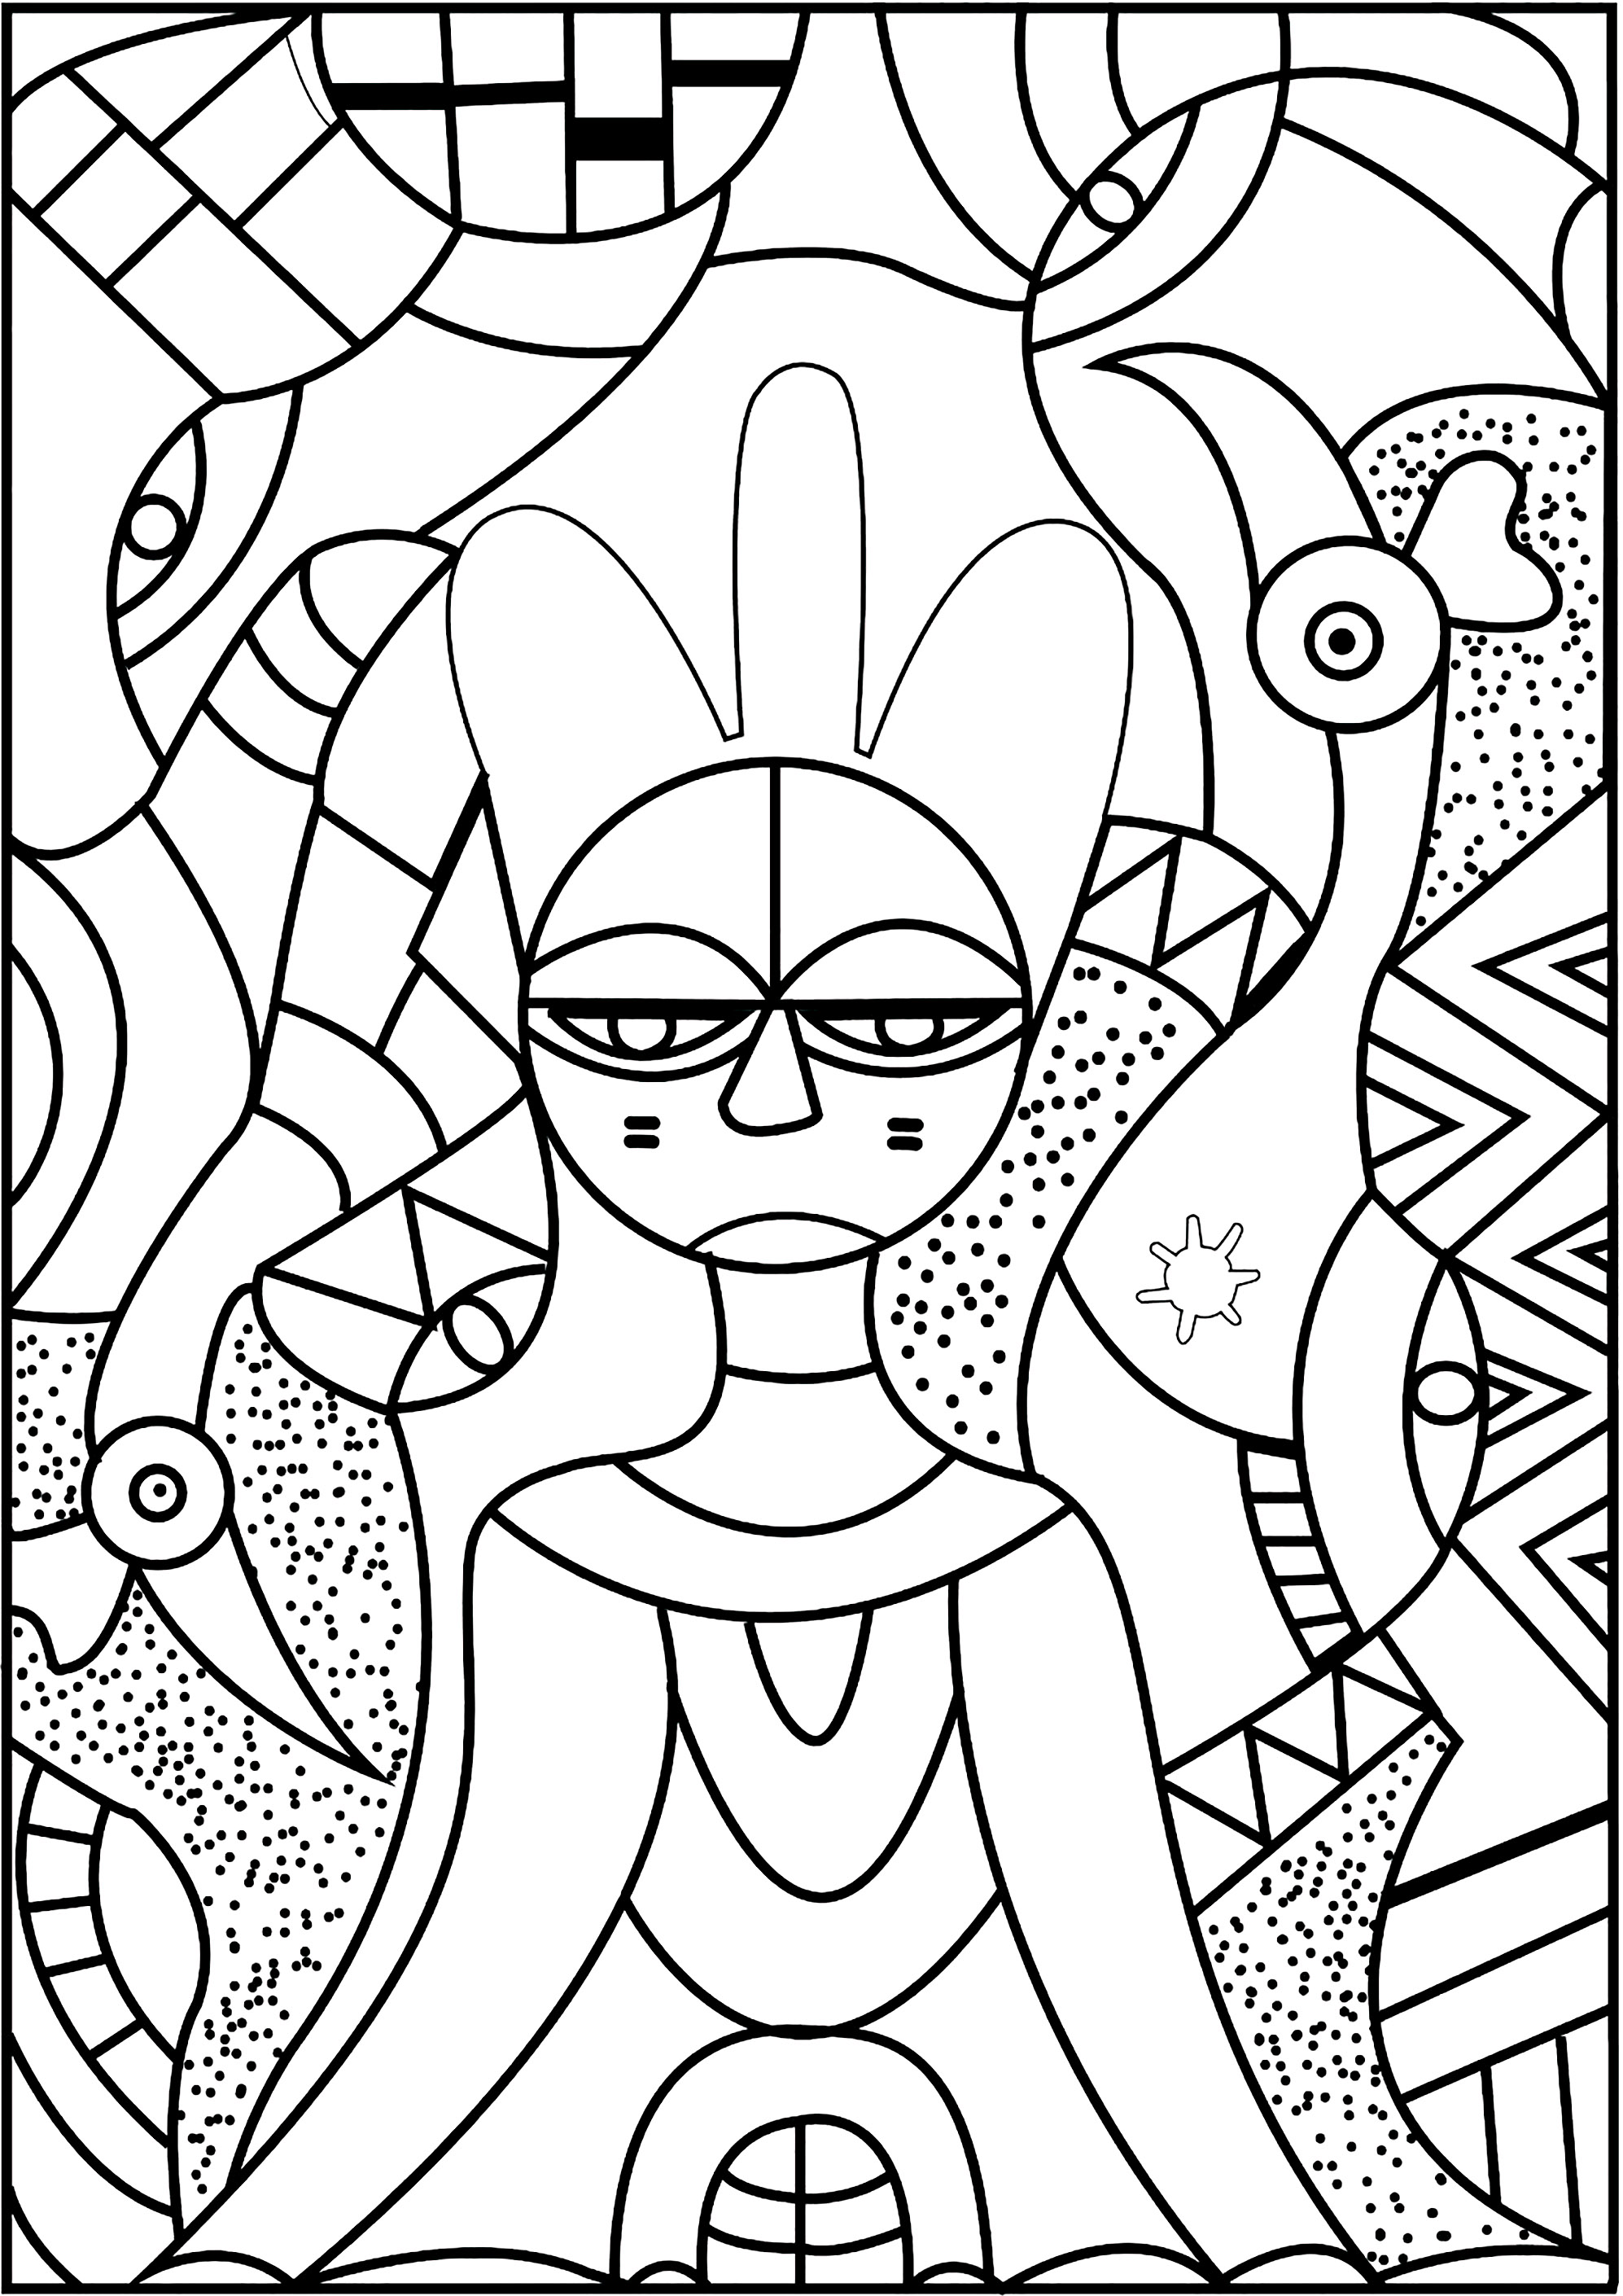 Coloring page freely inspired by the paintings of the African artist Serge Menandi